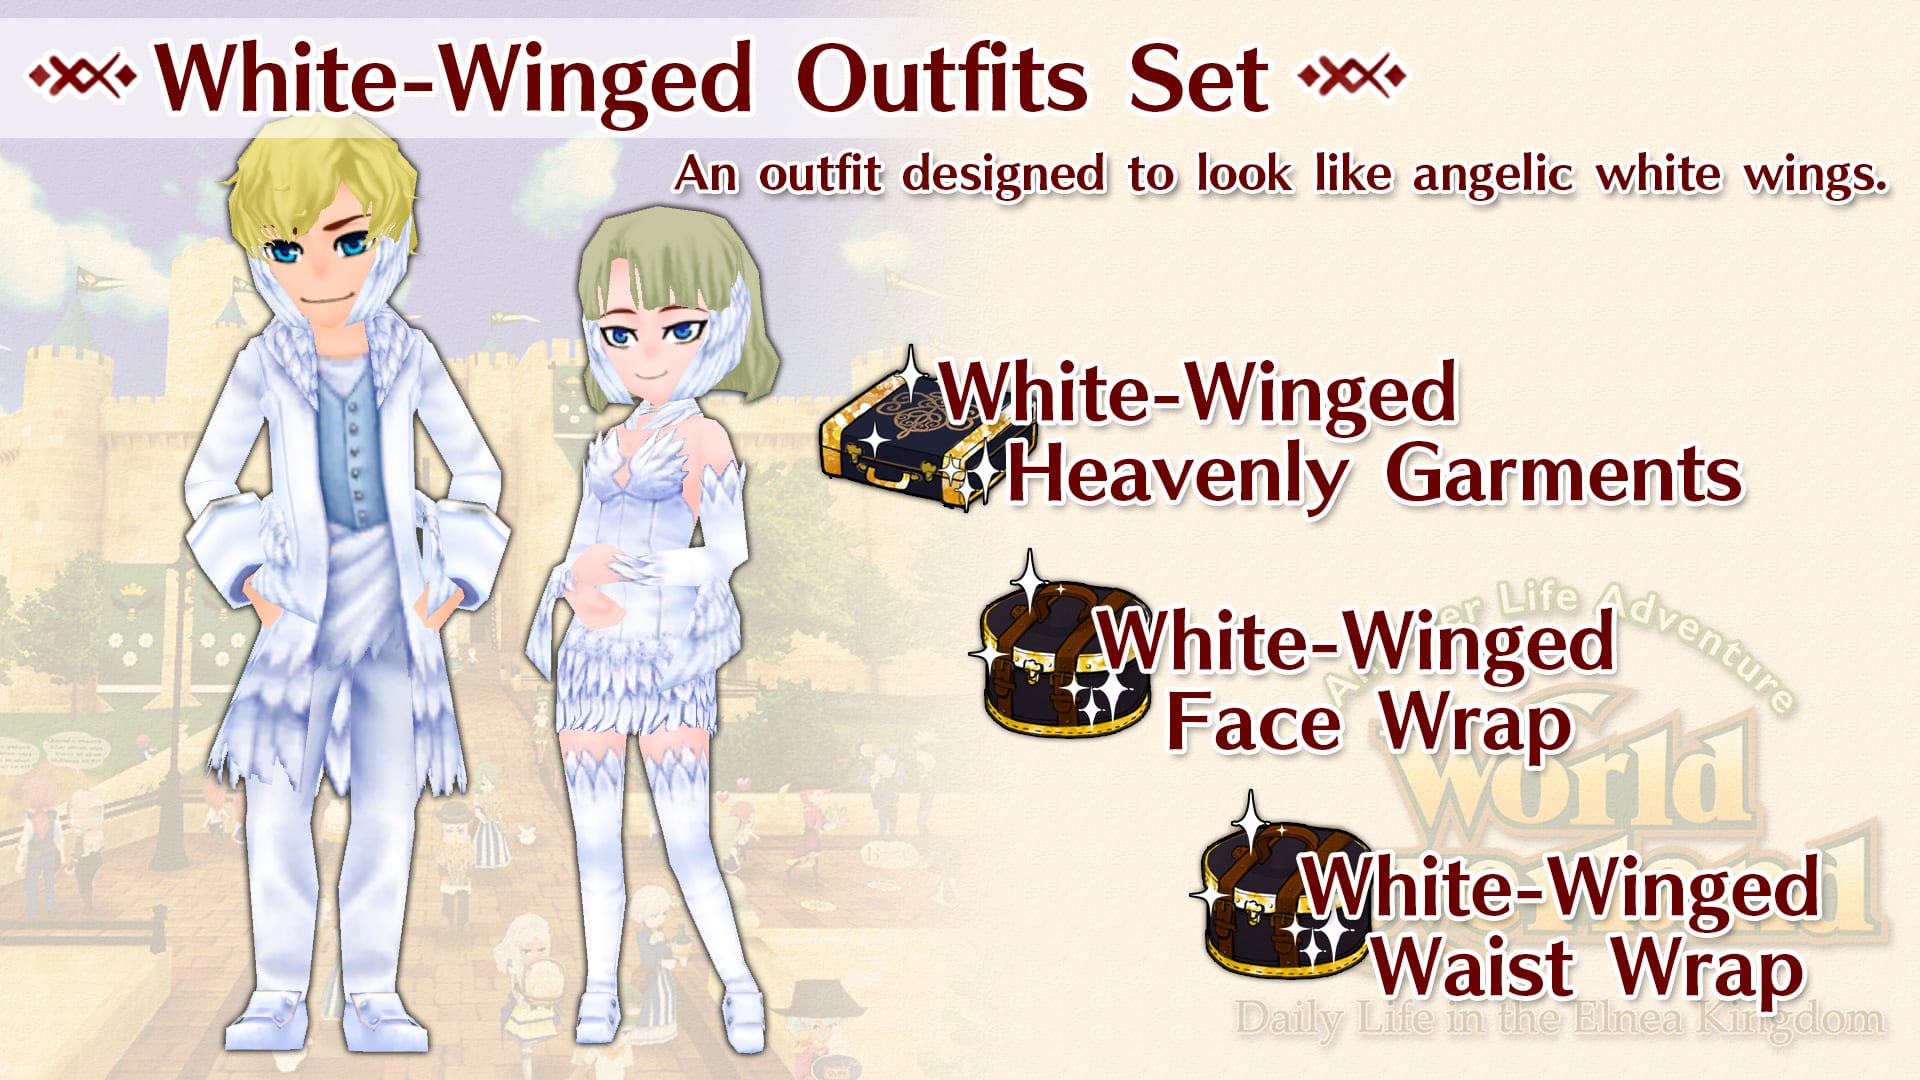 White-Winged Outfits Set